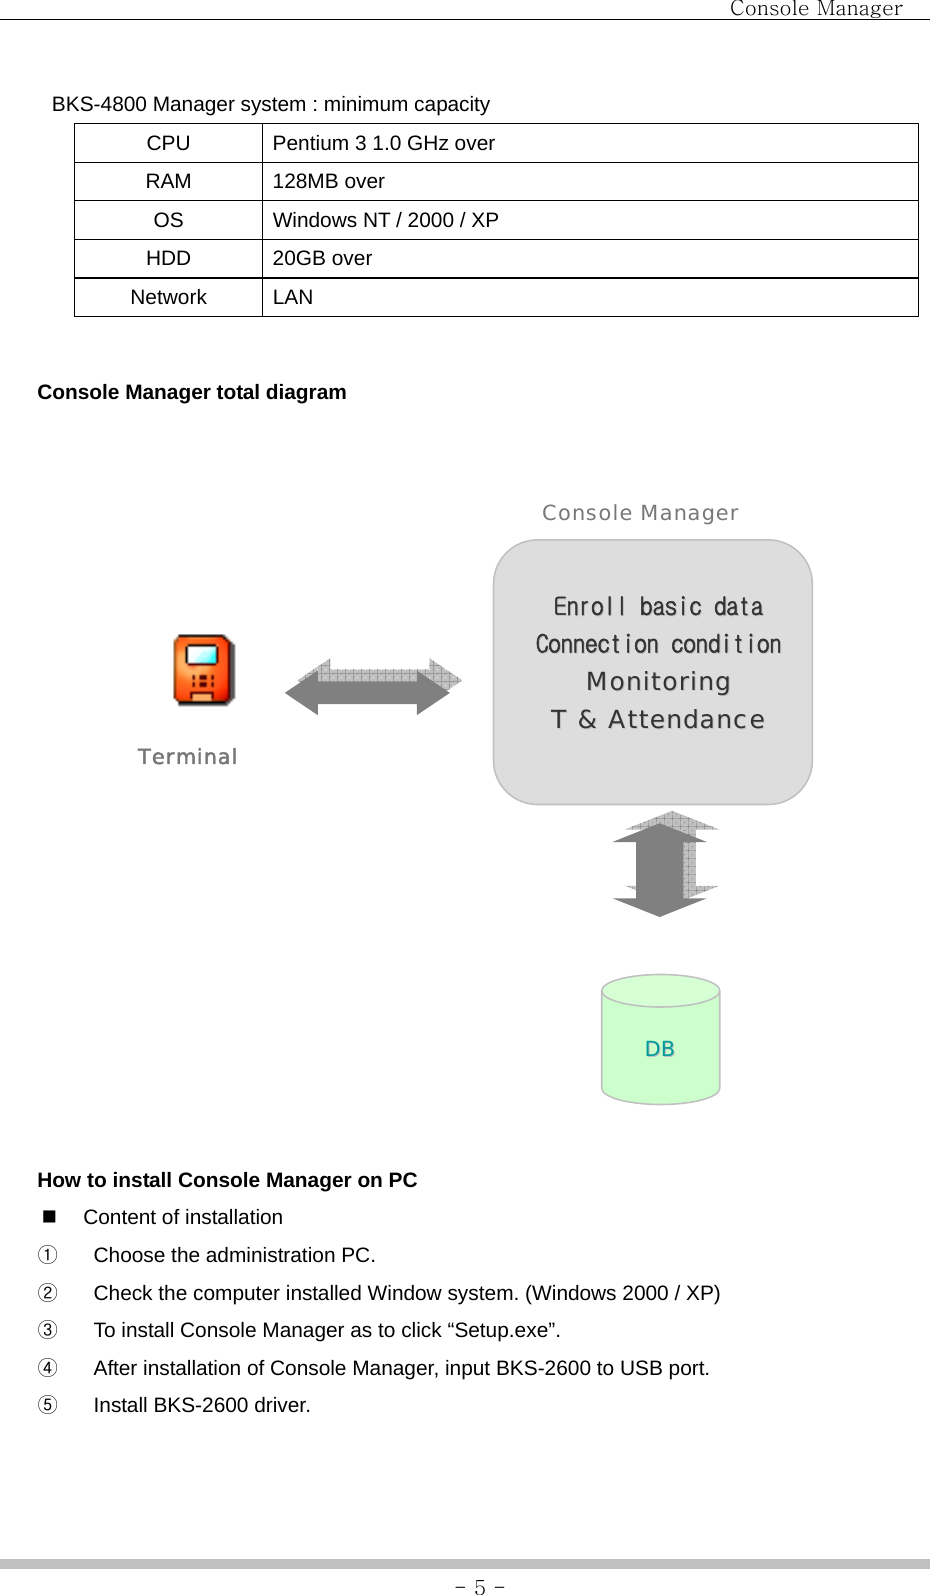                                Console Manager               - 5 -BKS-4800 Manager system : minimum capacity CPU  Pentium 3 1.0 GHz over RAM 128MB over OS  Windows NT / 2000 / XP HDD 20GB over Network LAN    Console Manager total diagram        How to install Console Manager on PC     Content of installation ①  Choose the administration PC. ②  Check the computer installed Window system. (Windows 2000 / XP) ③  To install Console Manager as to click “Setup.exe”. ④  After installation of Console Manager, input BKS-2600 to USB port. ⑤  Install BKS-2600 driver. EEnnrroollll  bbaassiicc  ddaattaa  CCoonnnneeccttiioonn  ccoonnddiittiioonn    MMoonniittoorriinngg  TT  &amp;&amp;  AAtttteennddaannccee  DDBB  Console Manager Terminal 